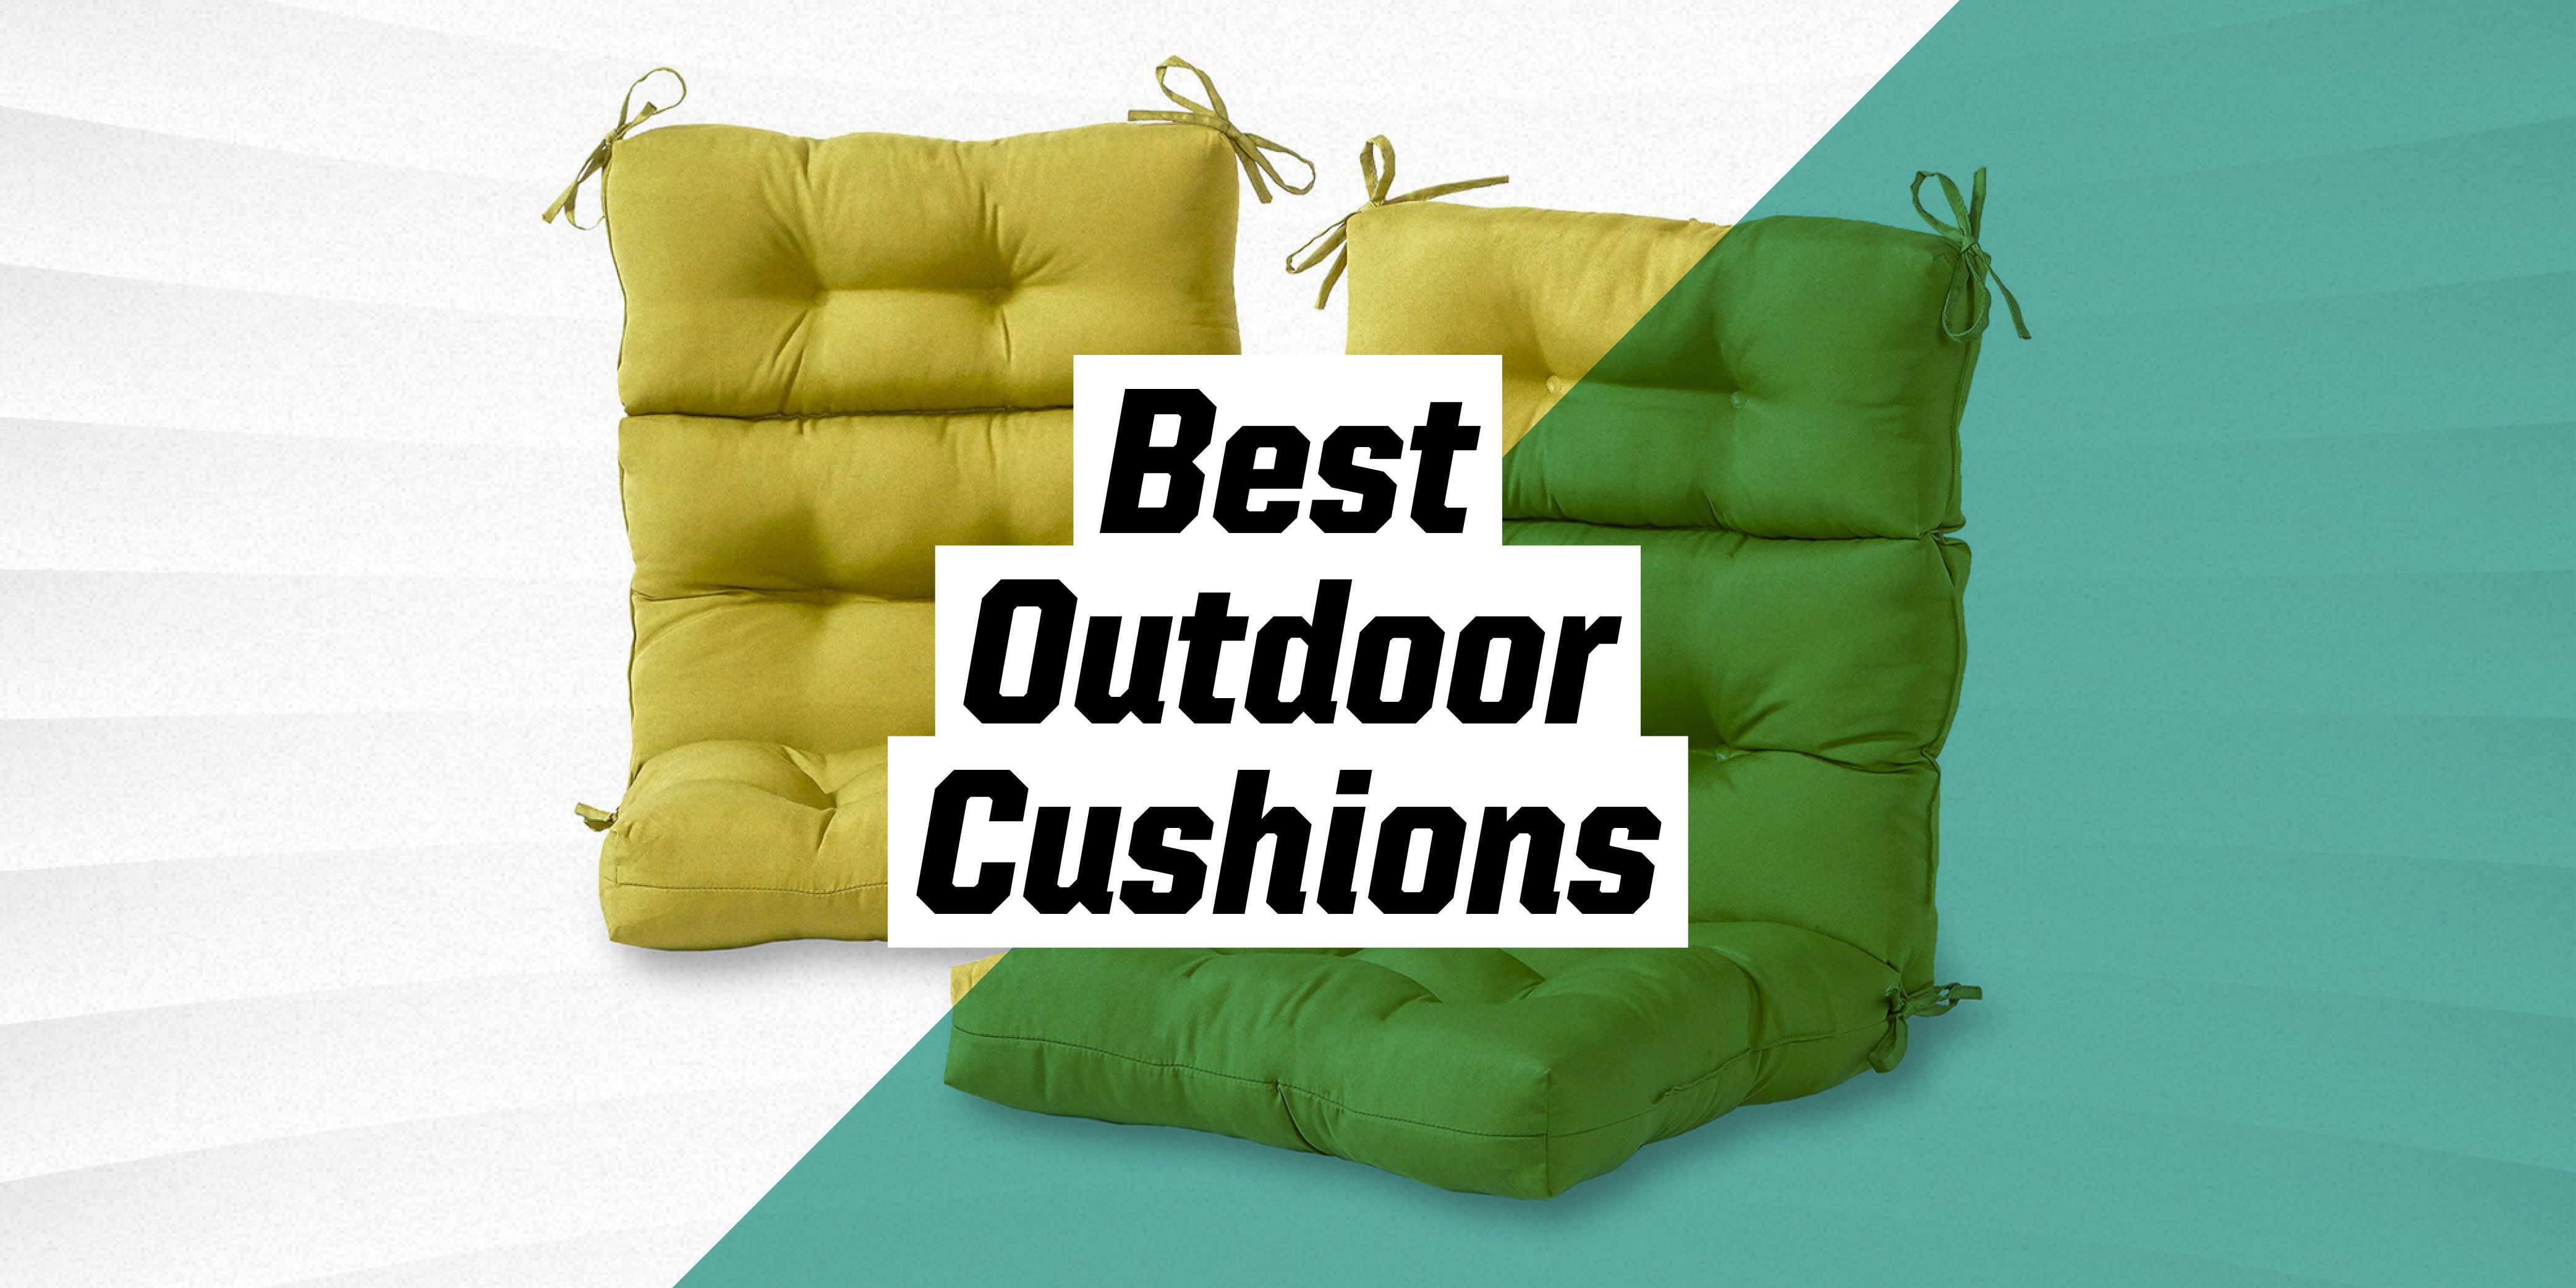 Need New Outdoor Cushions This Year. Try These 10 Tips for 23x23 Covers